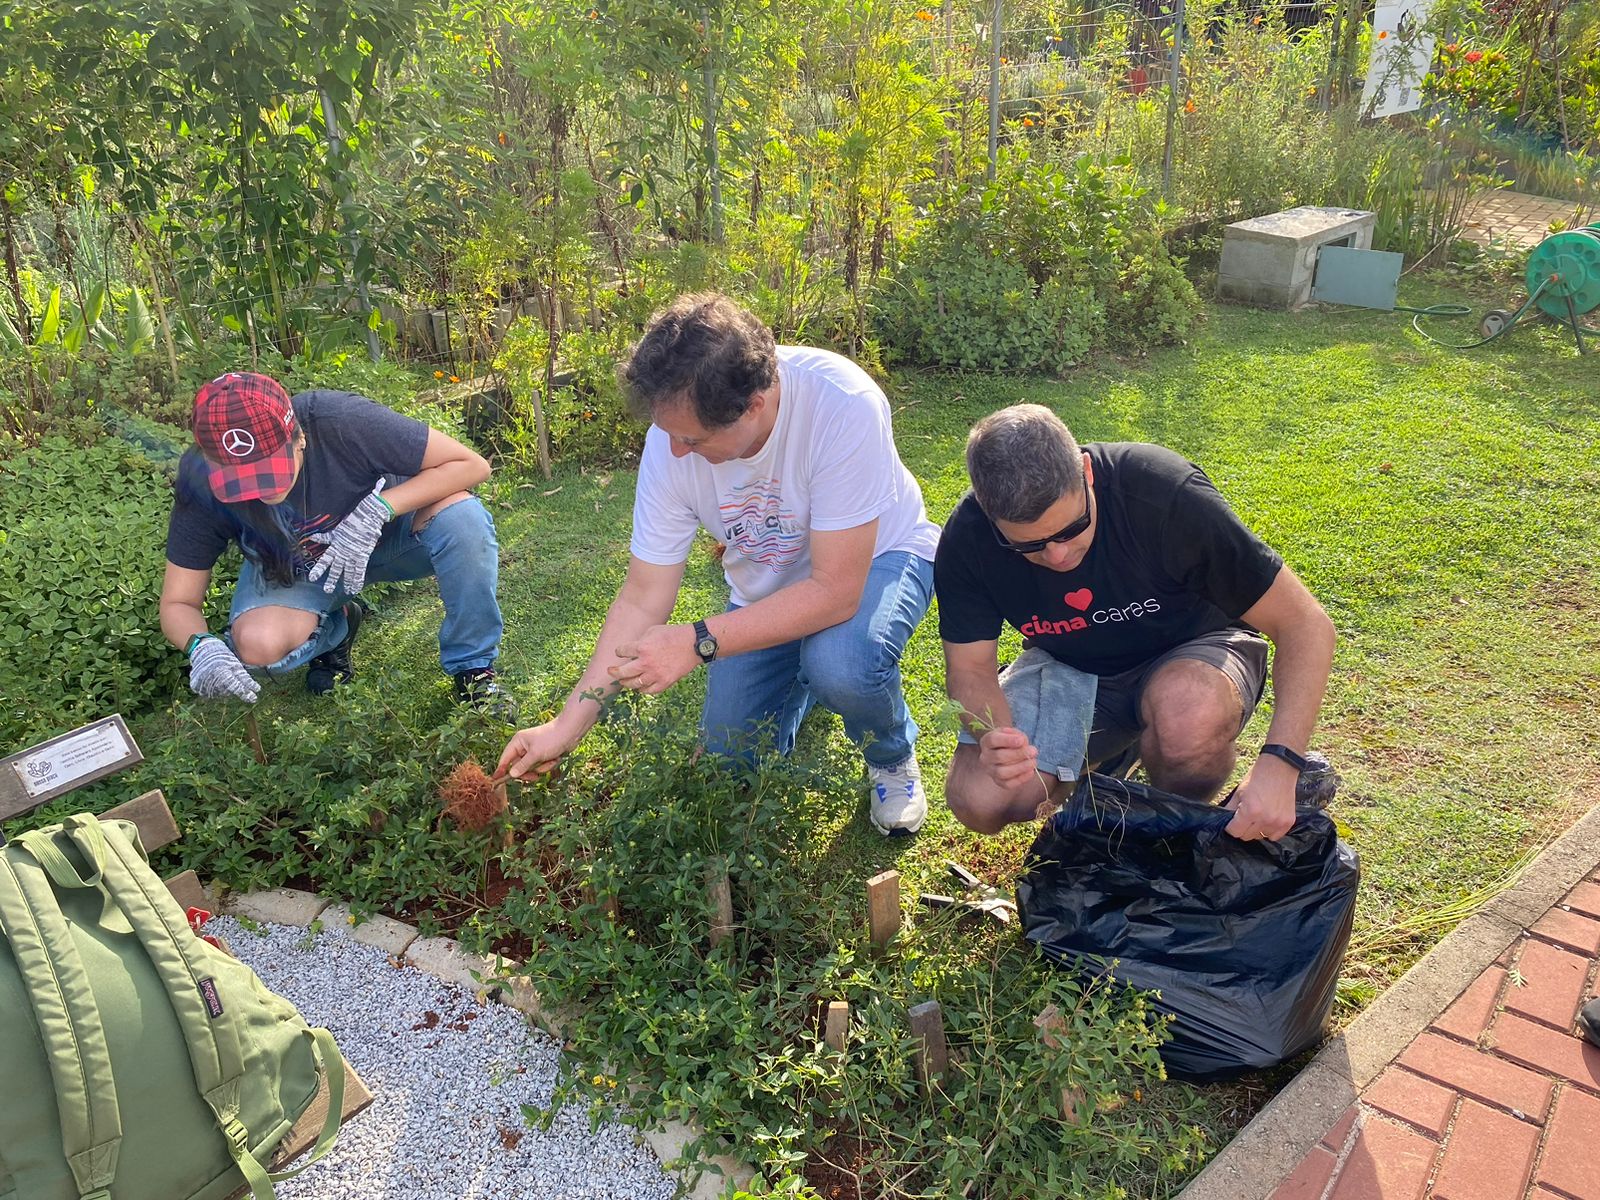 Men pulling weeds from a flowerbed